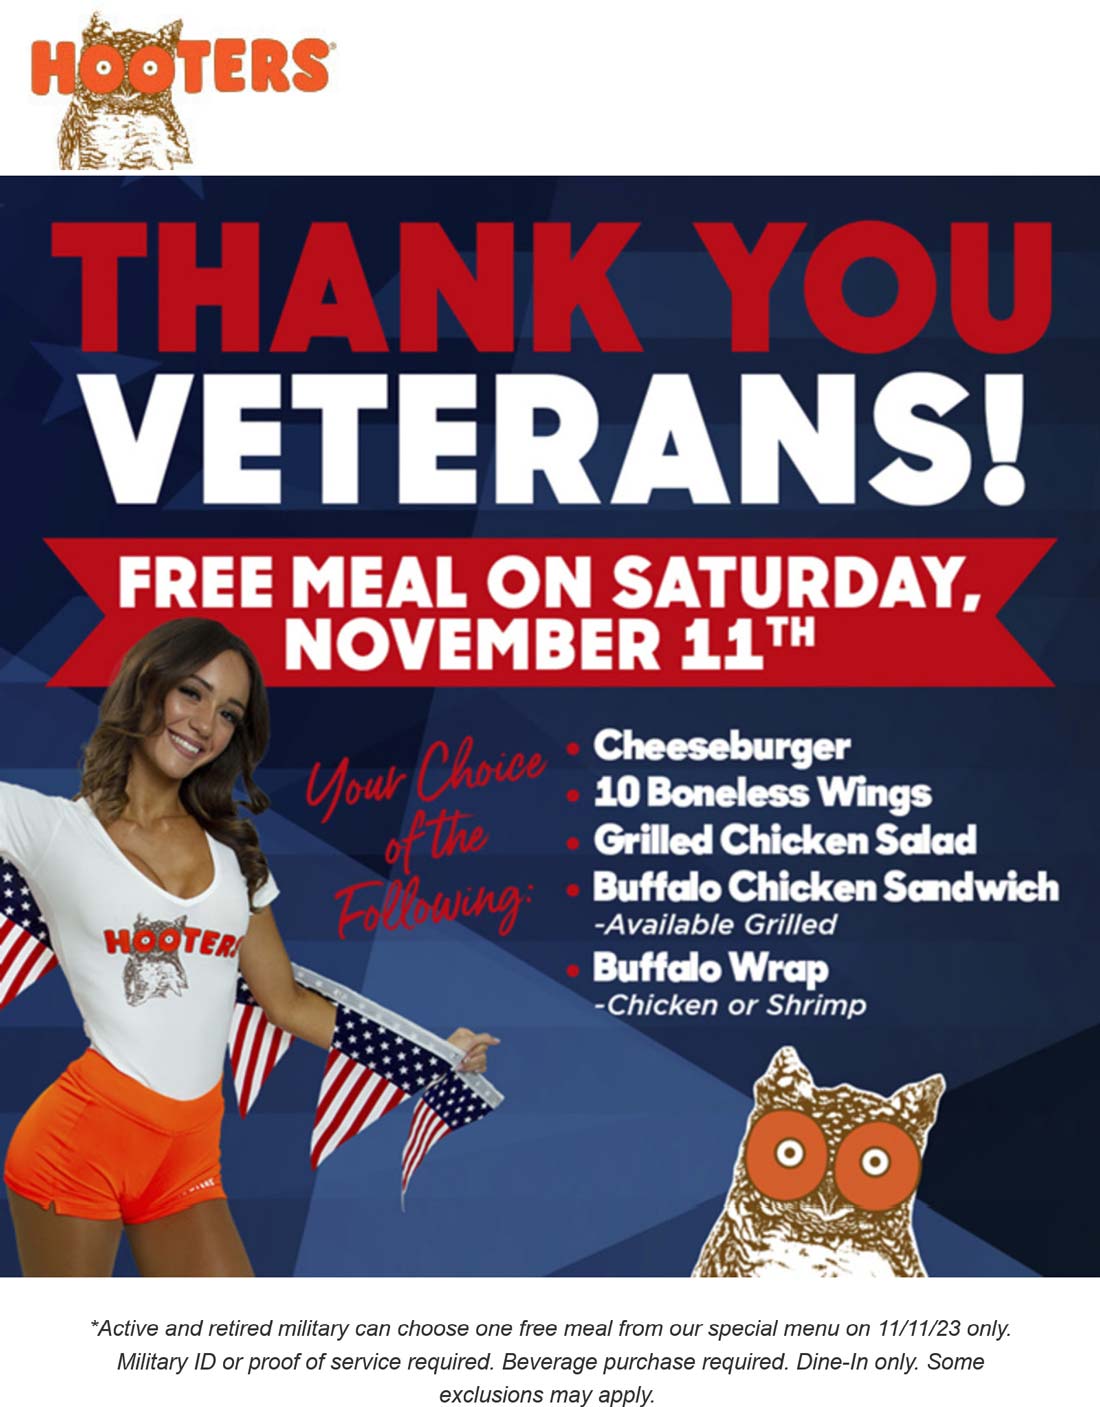 Hooters restaurants Coupon  Veterans & active enjoy a free meal Saturday at Hooters #hooters 